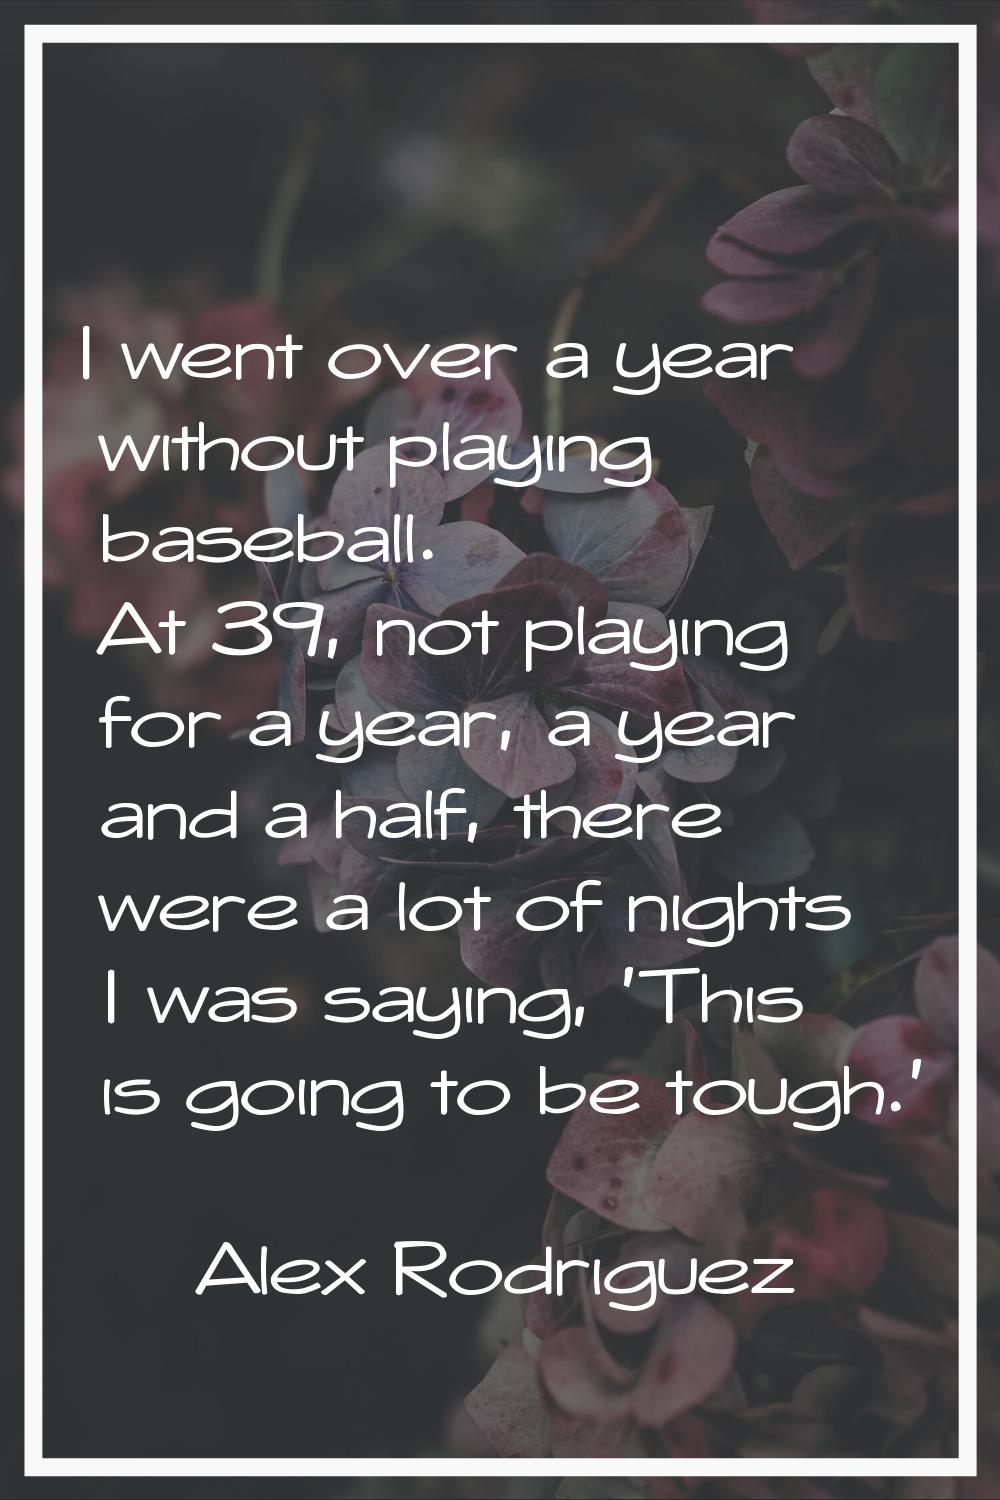 I went over a year without playing baseball. At 39, not playing for a year, a year and a half, ther